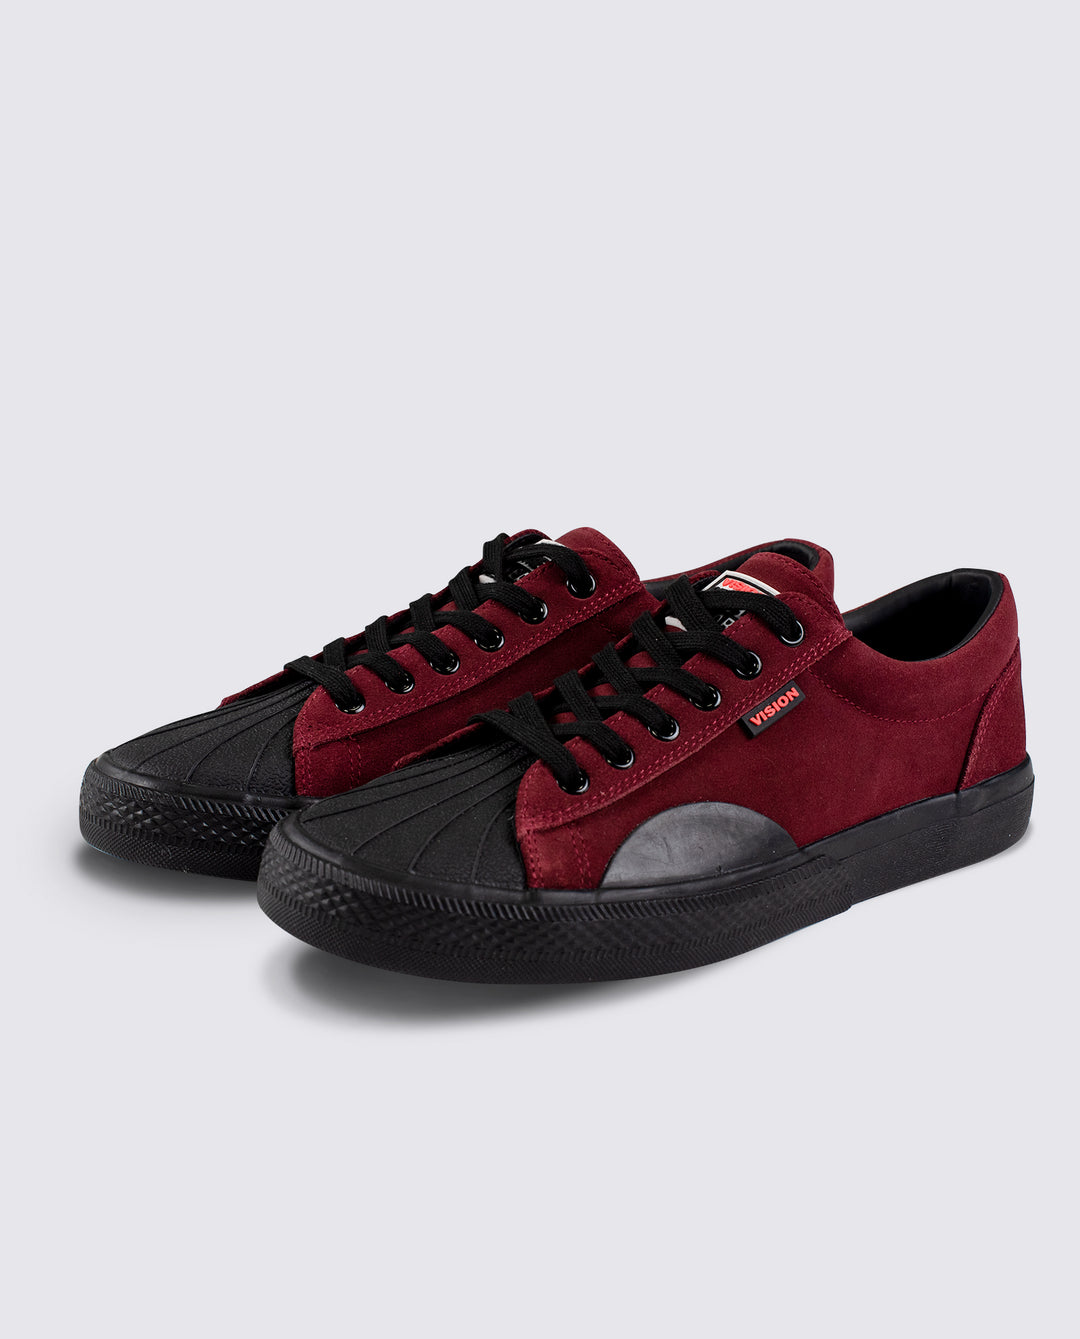 Leather Suede Low Top Sneakers Oxblood